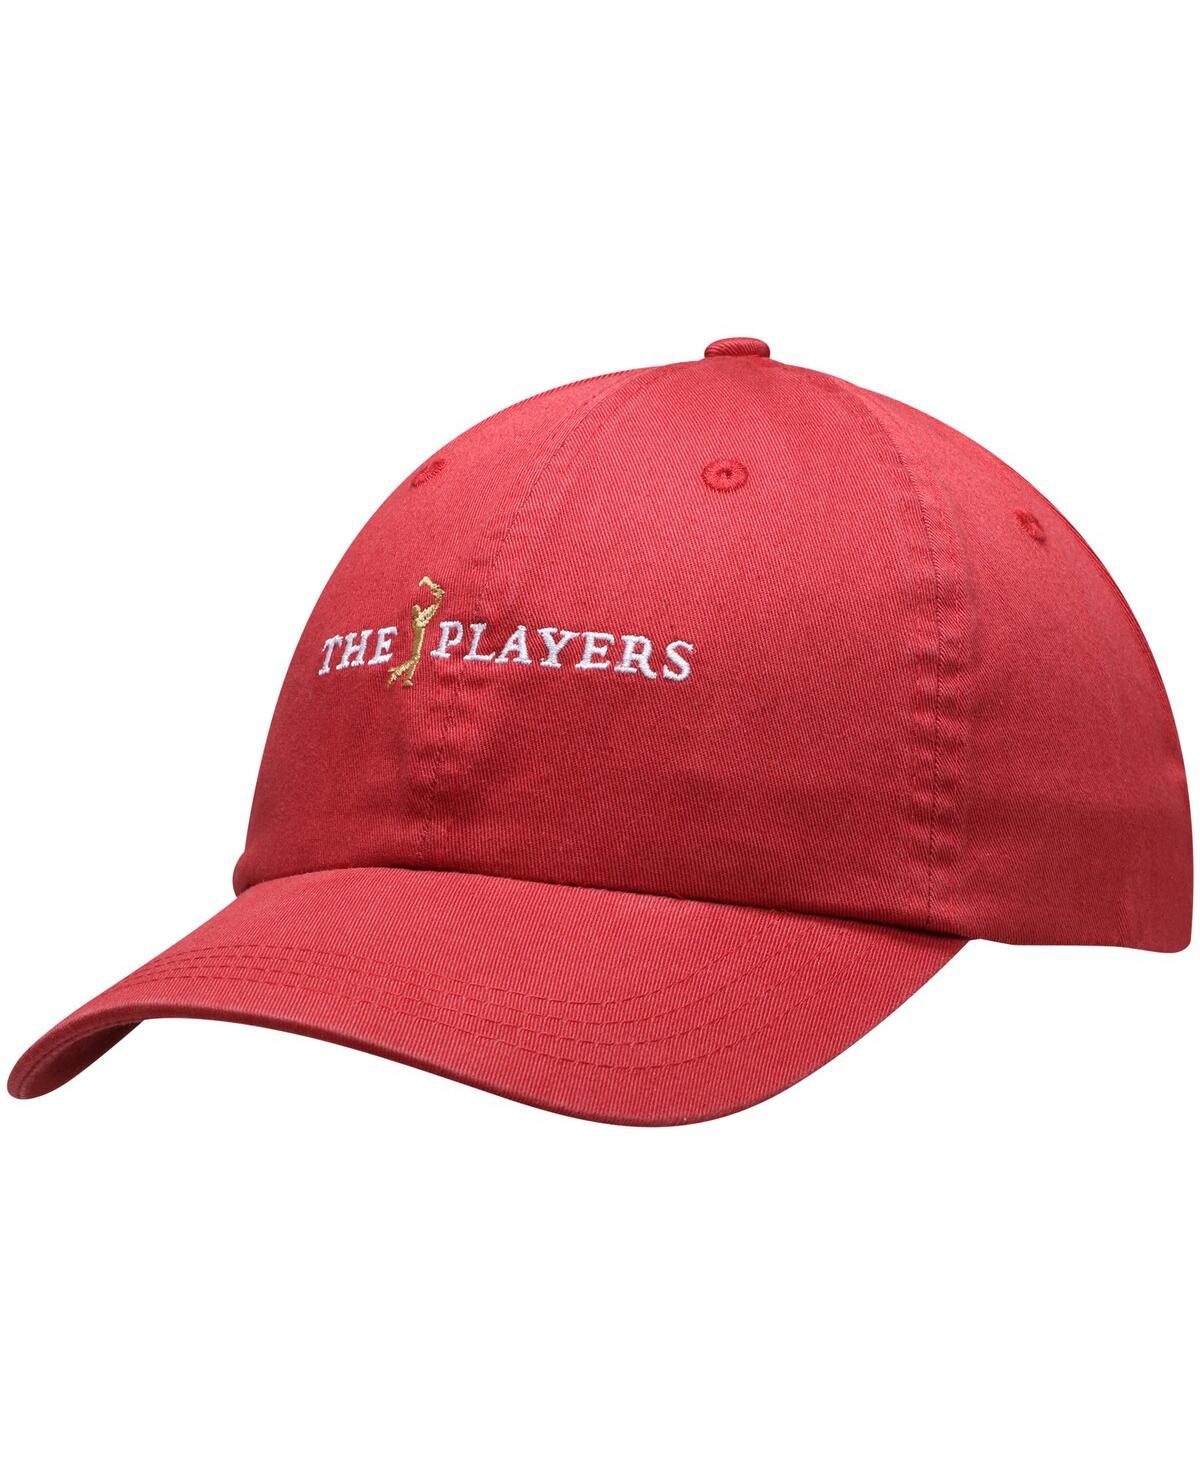 Men's Red The Players Newport Washed Adjustable Hat - Red